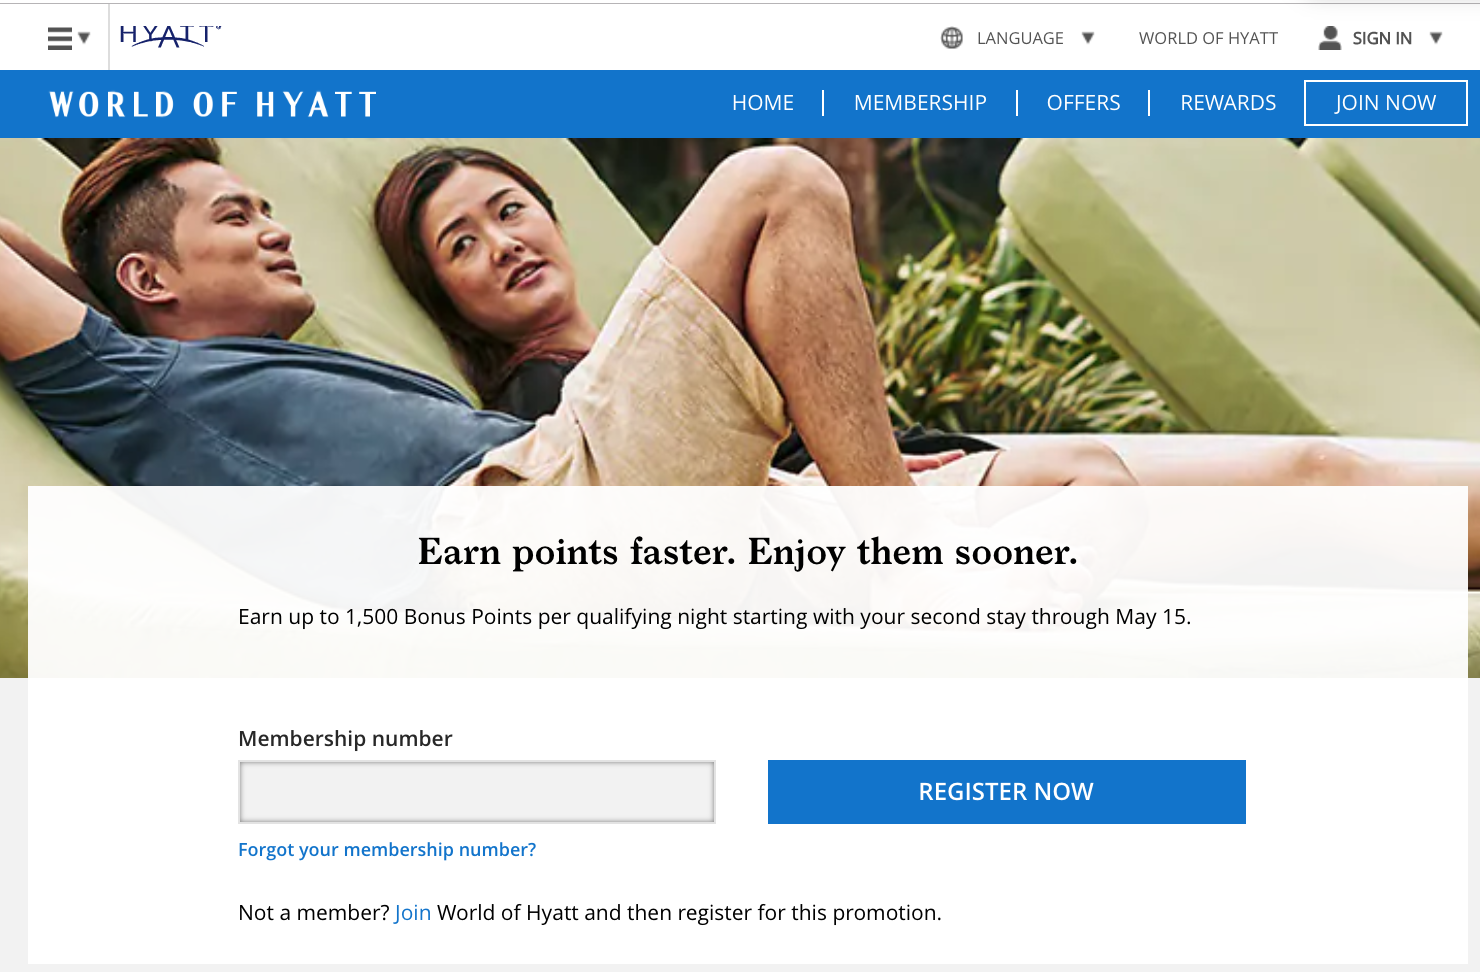 World of Hyatt Q1 2019 Promotion earns you upto 1500 points per night